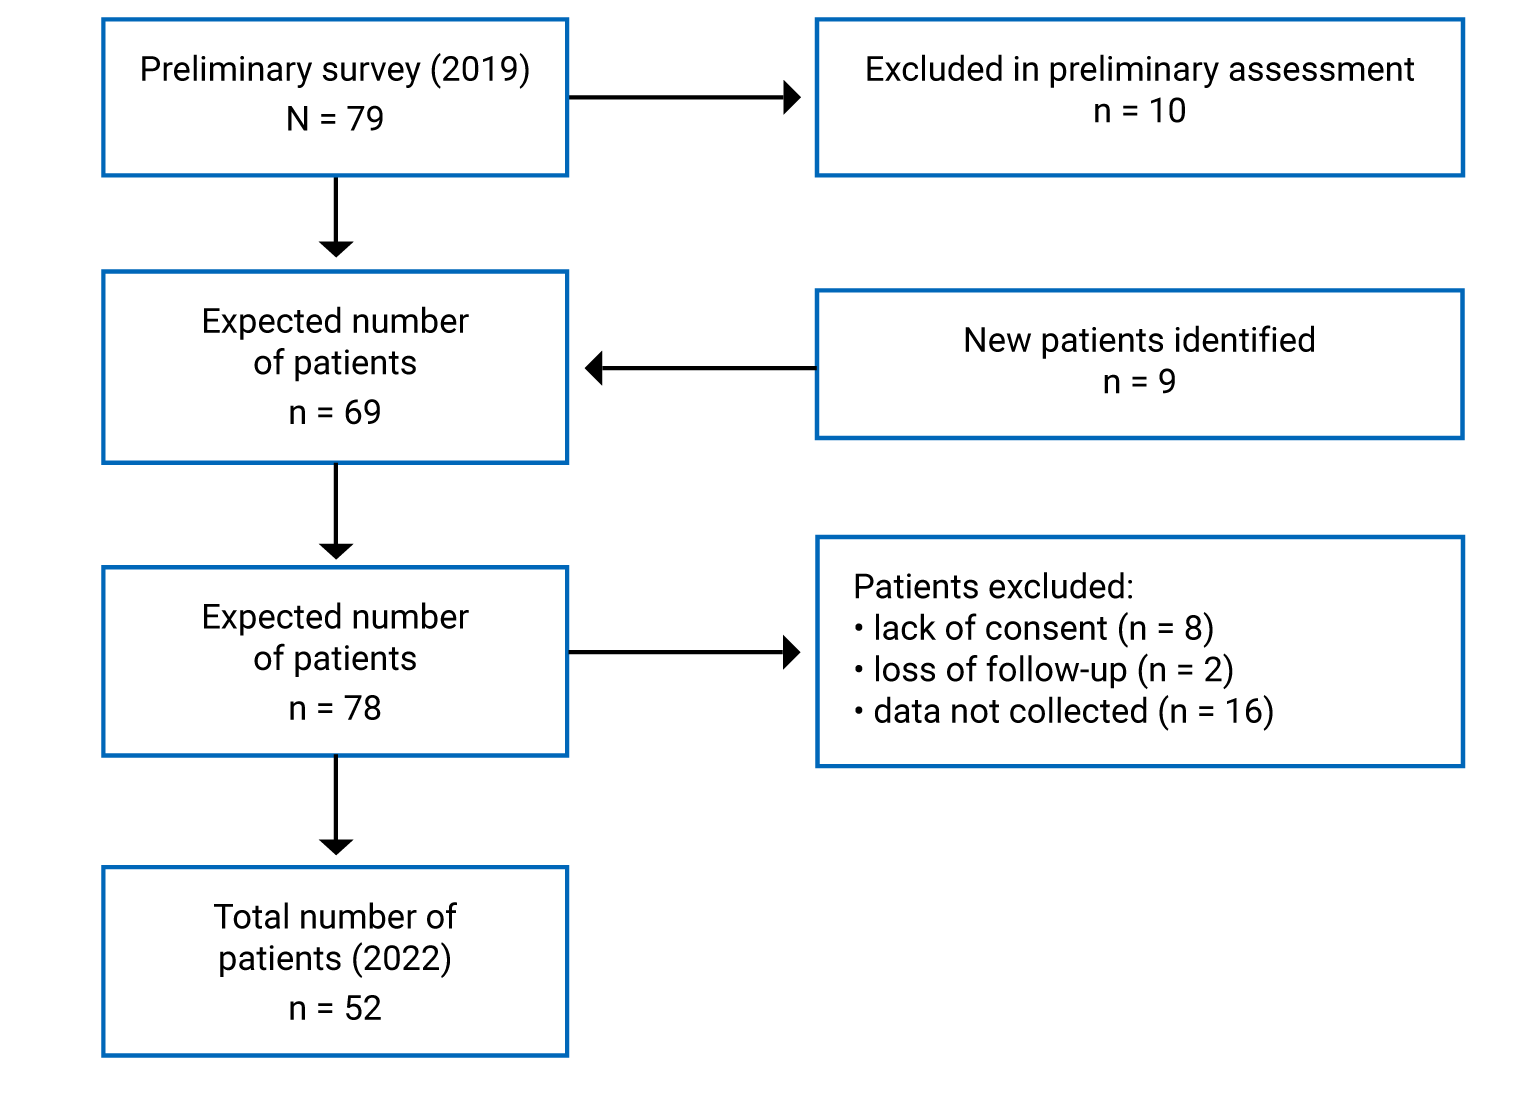 Figure 2 presents the search strategy of the Canadian HoFH registry, conducted within the framework of the national FH Canada Registry using an observational study design. A total of 79 patients with HoFH was expected. After excluding 36 patients based on preliminary assessments of patient diagnosis, lack of consent, loss of follow-up, and lack of data collection, and including 9 patients not captured in the original survey, 52 patients were available for data collection as of April 2022.